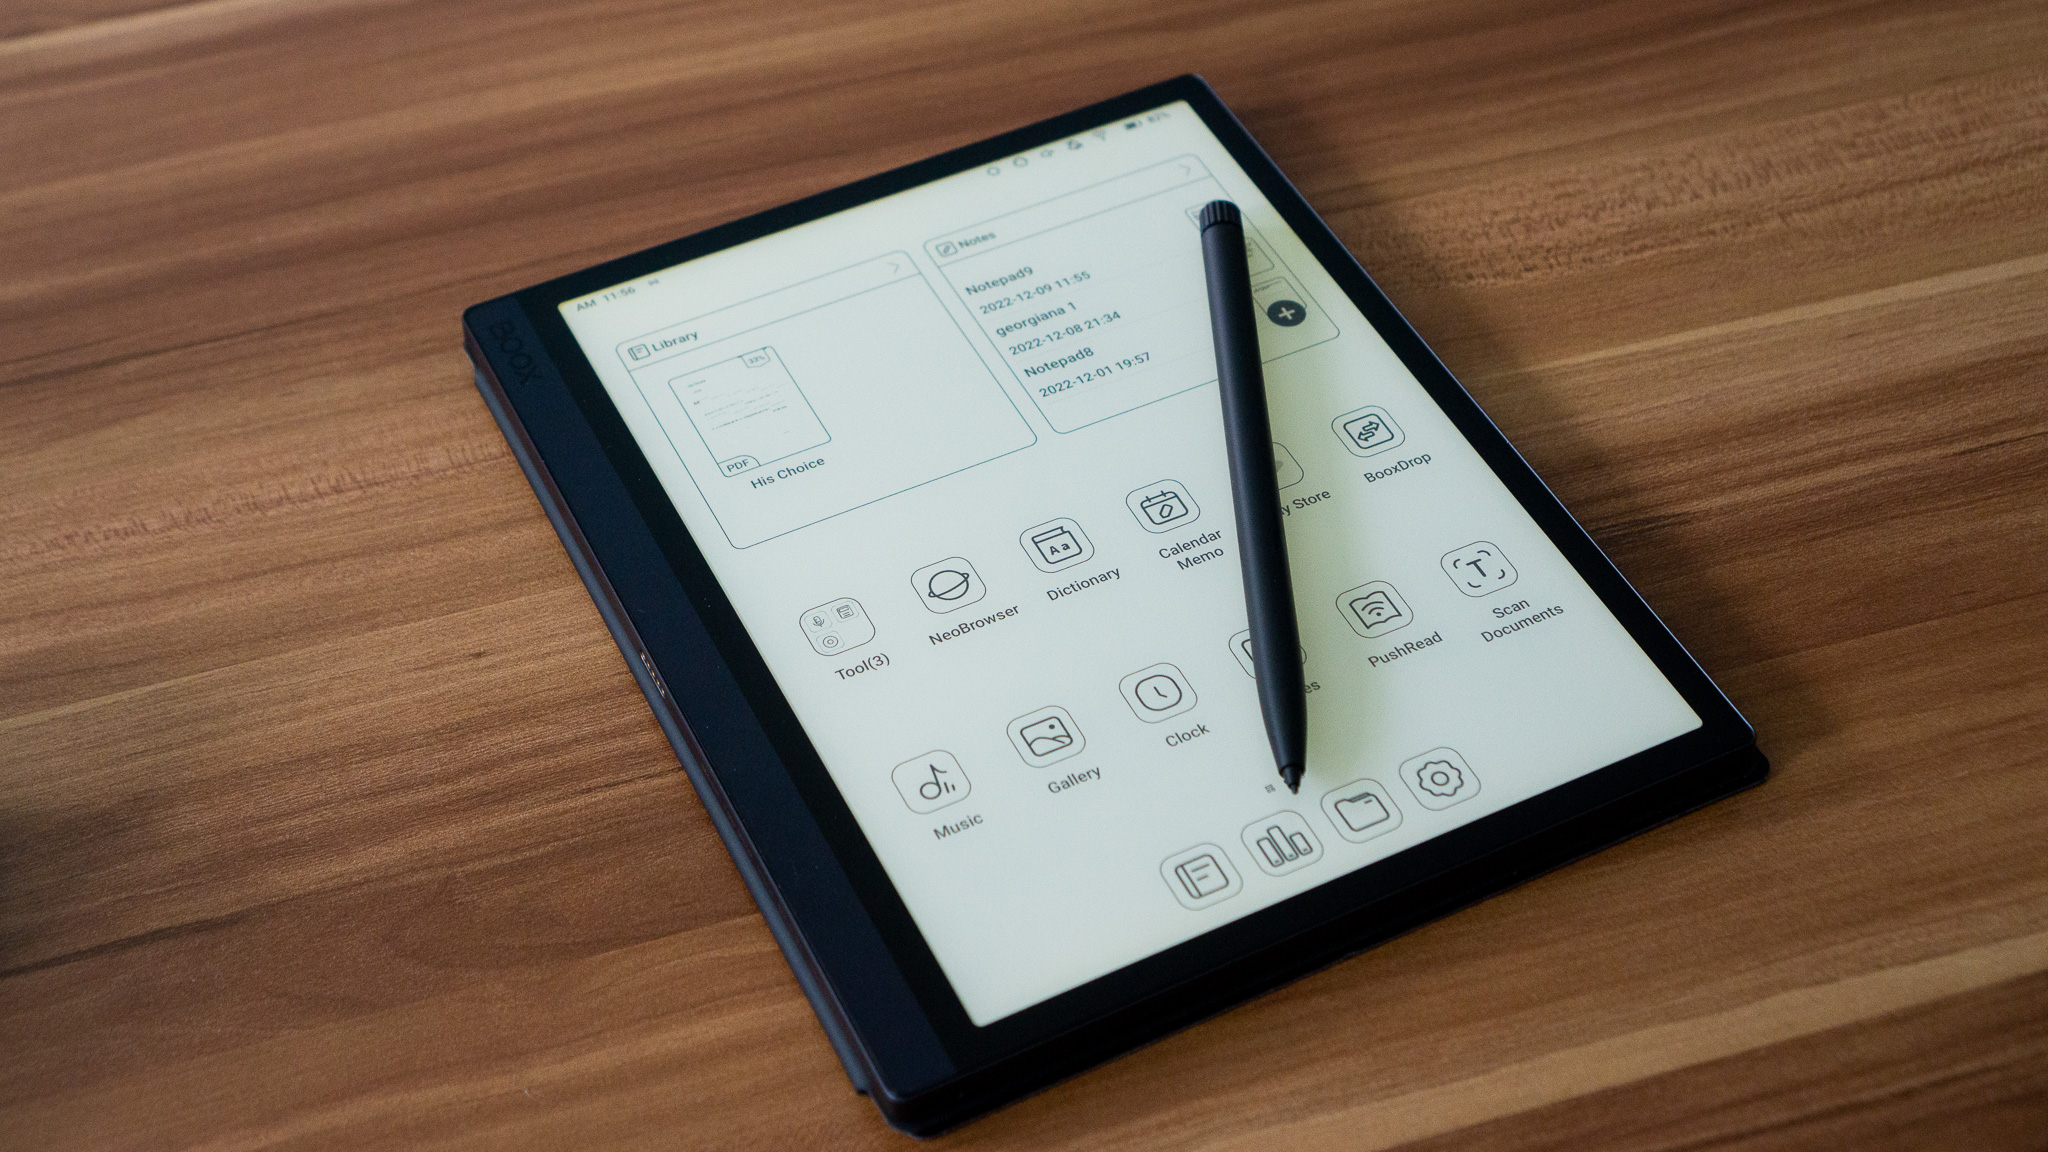 Remarkable Tablet: The full review